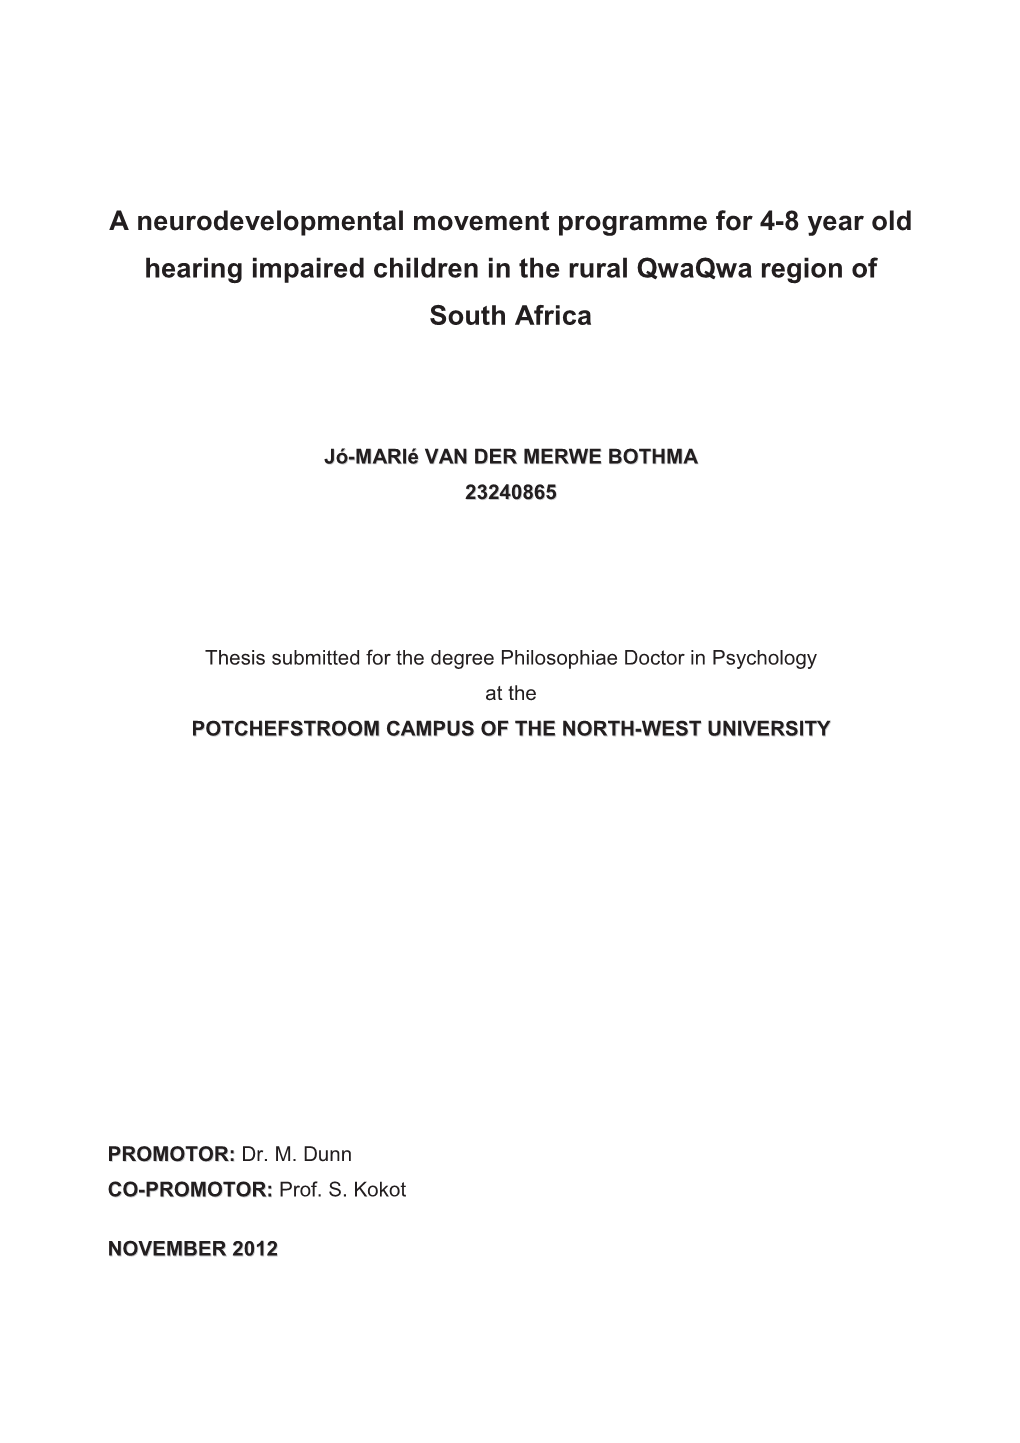 A Neurodevelopmental Movement Programme for 4-8 Year Old Hearing Impaired Children in the Rural Qwaqwa Region of South Africa